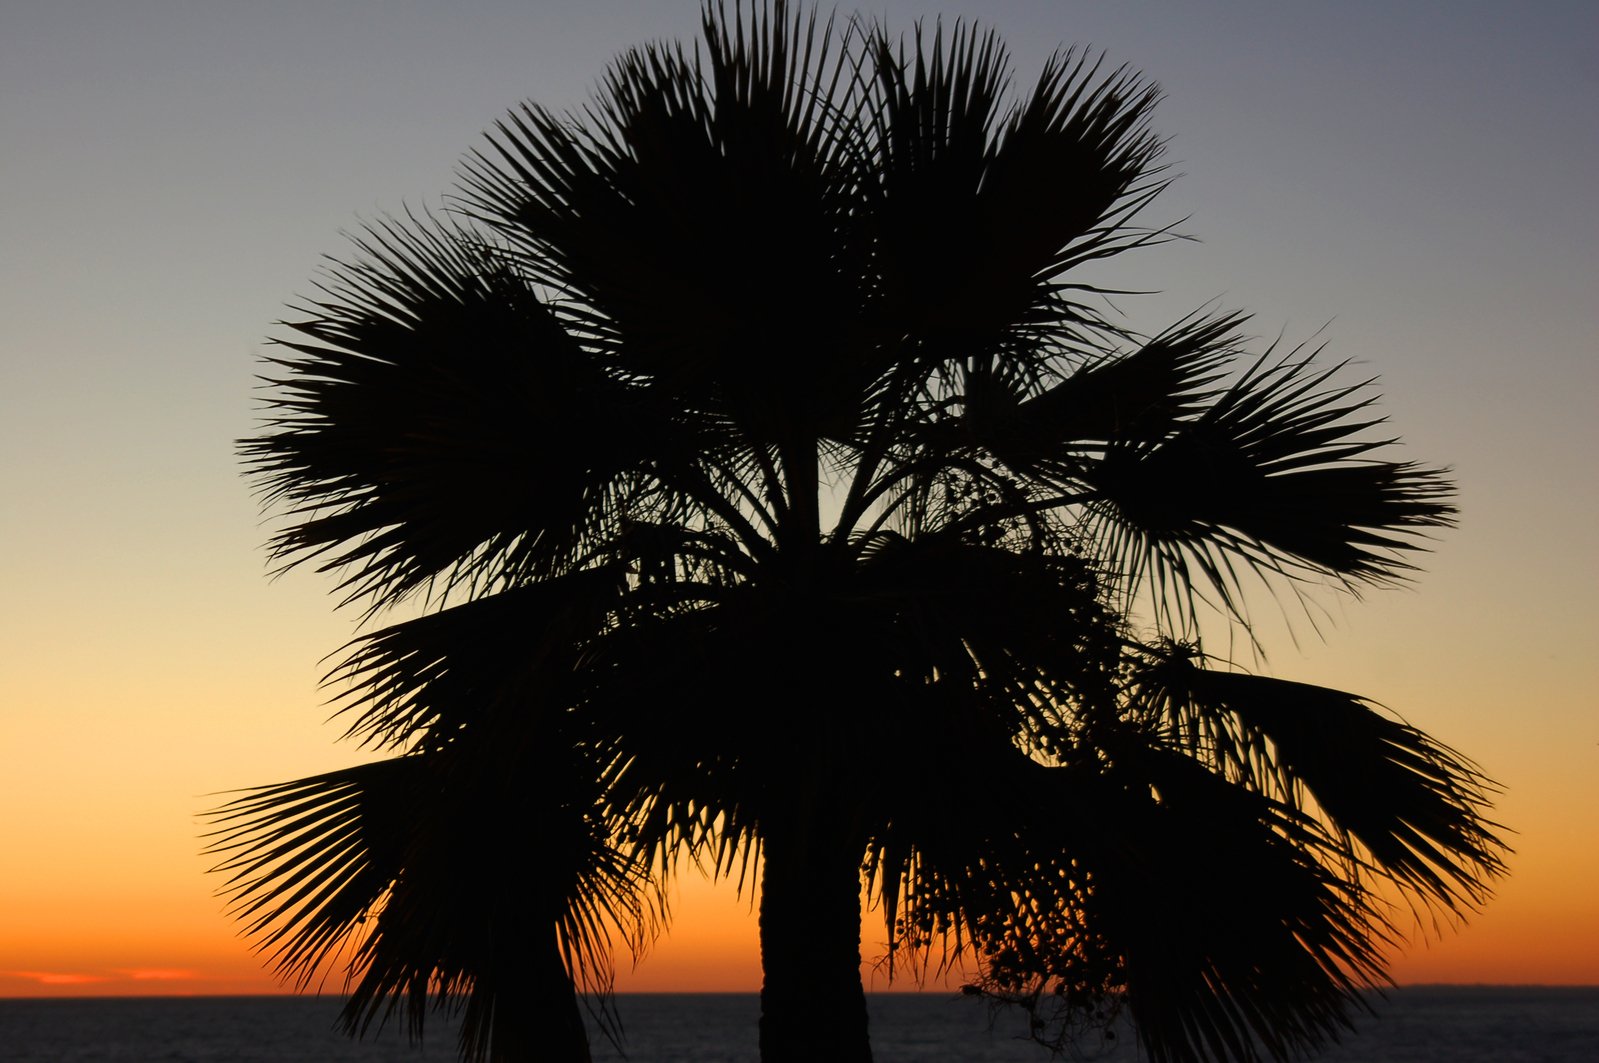 the silhouette of a palm tree in front of an orange sunset